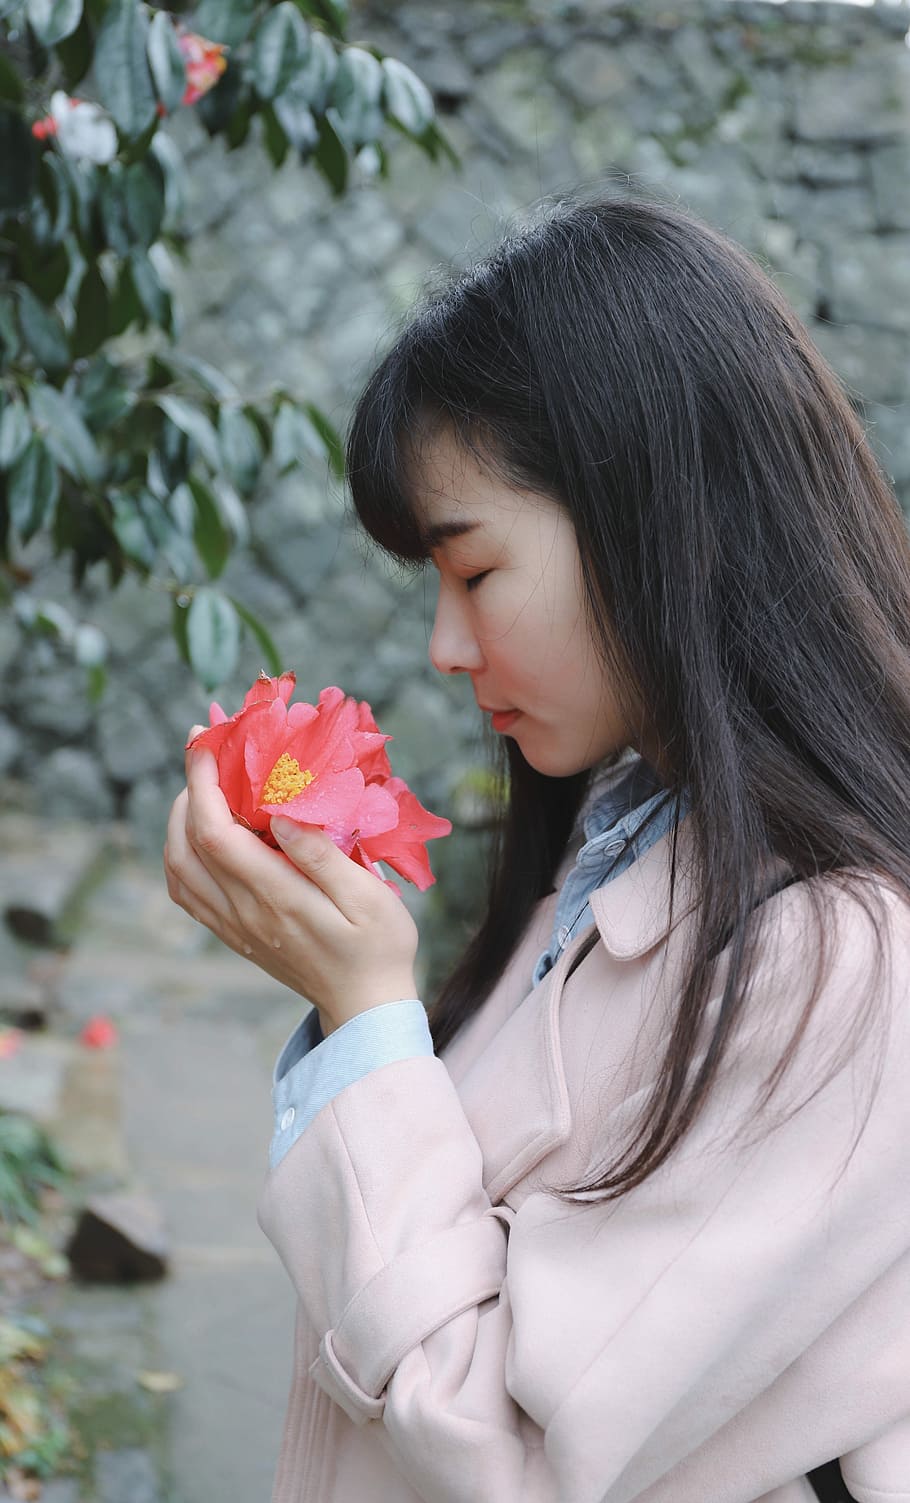 woman sniffing flower on her hands, woman smelling and holding pink camellia flower, HD wallpaper